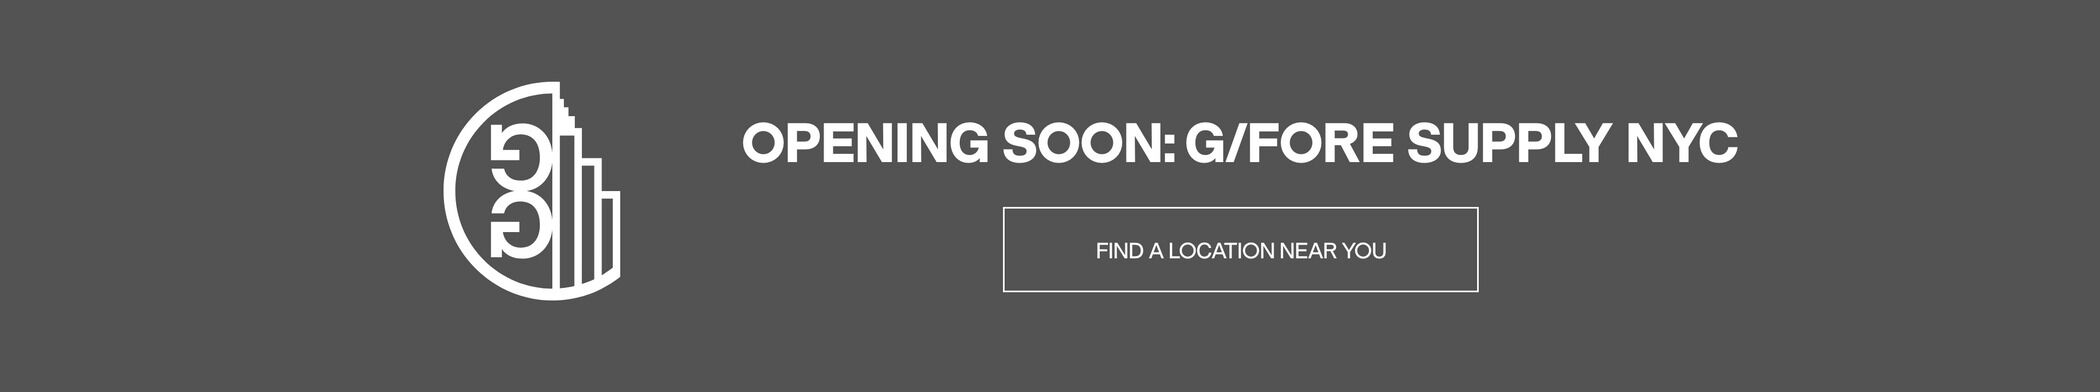 Opening Soon: GFORE Supply NYC